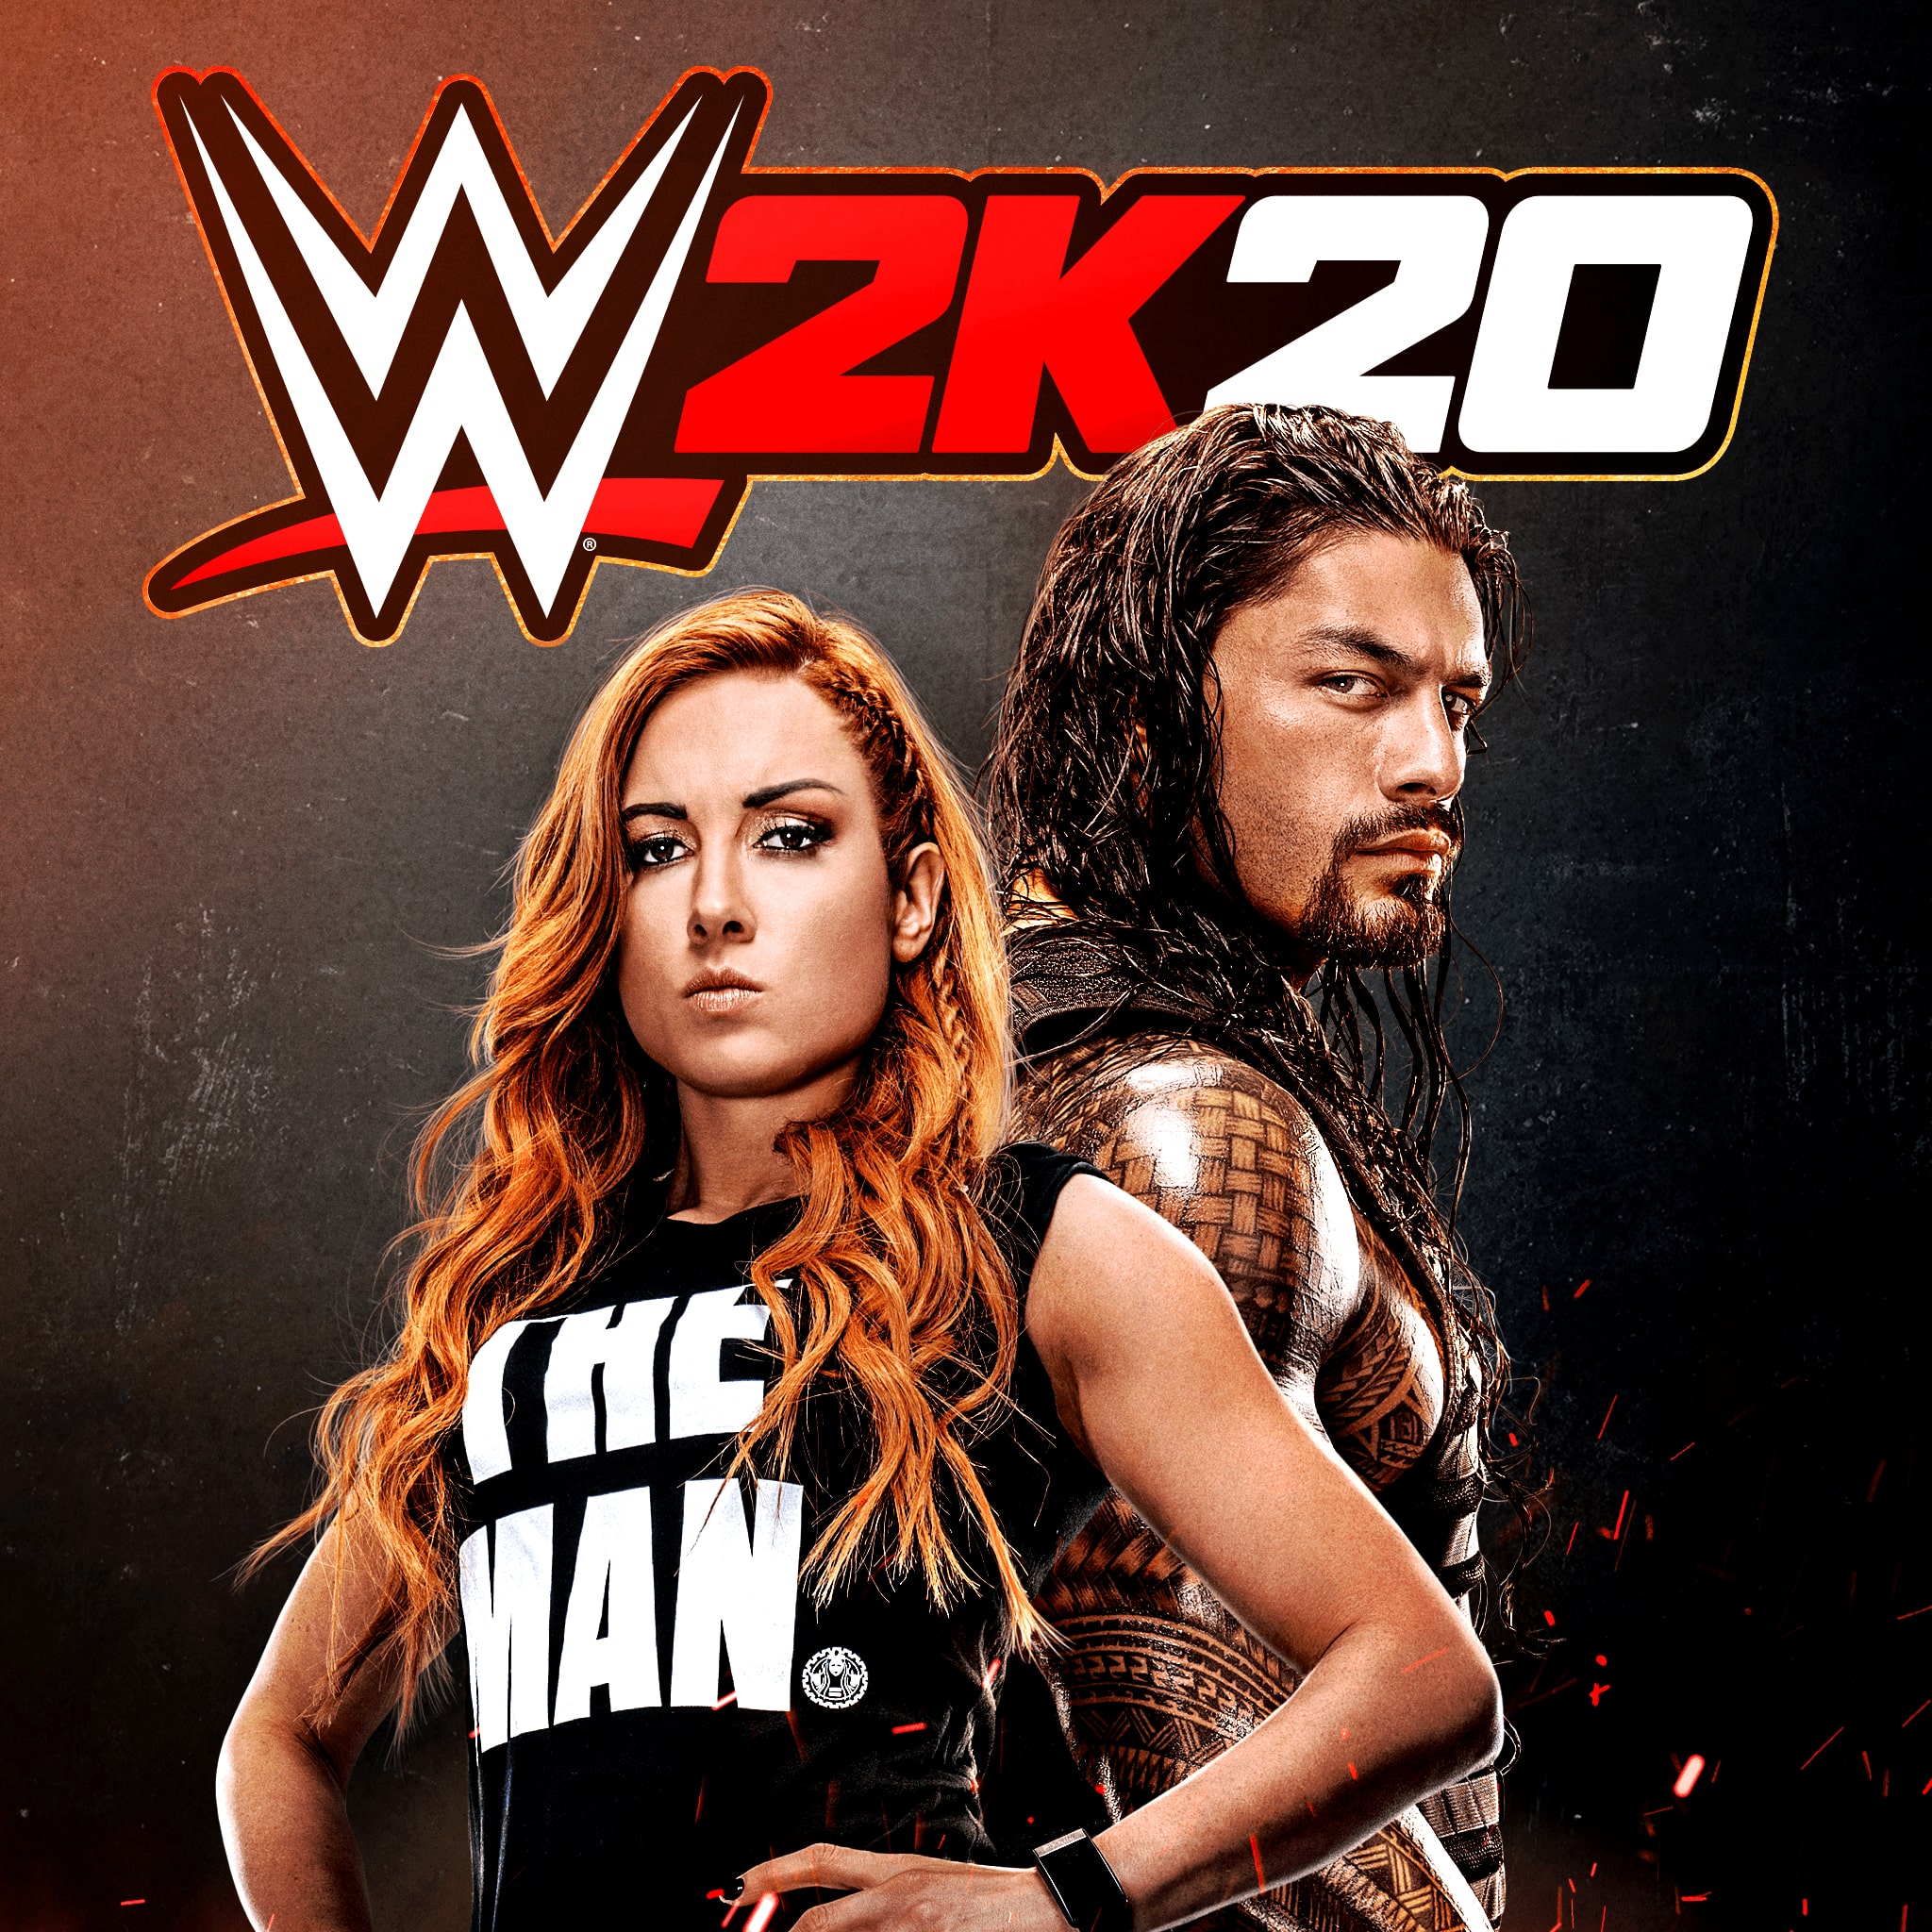 2k20 price on playstation store